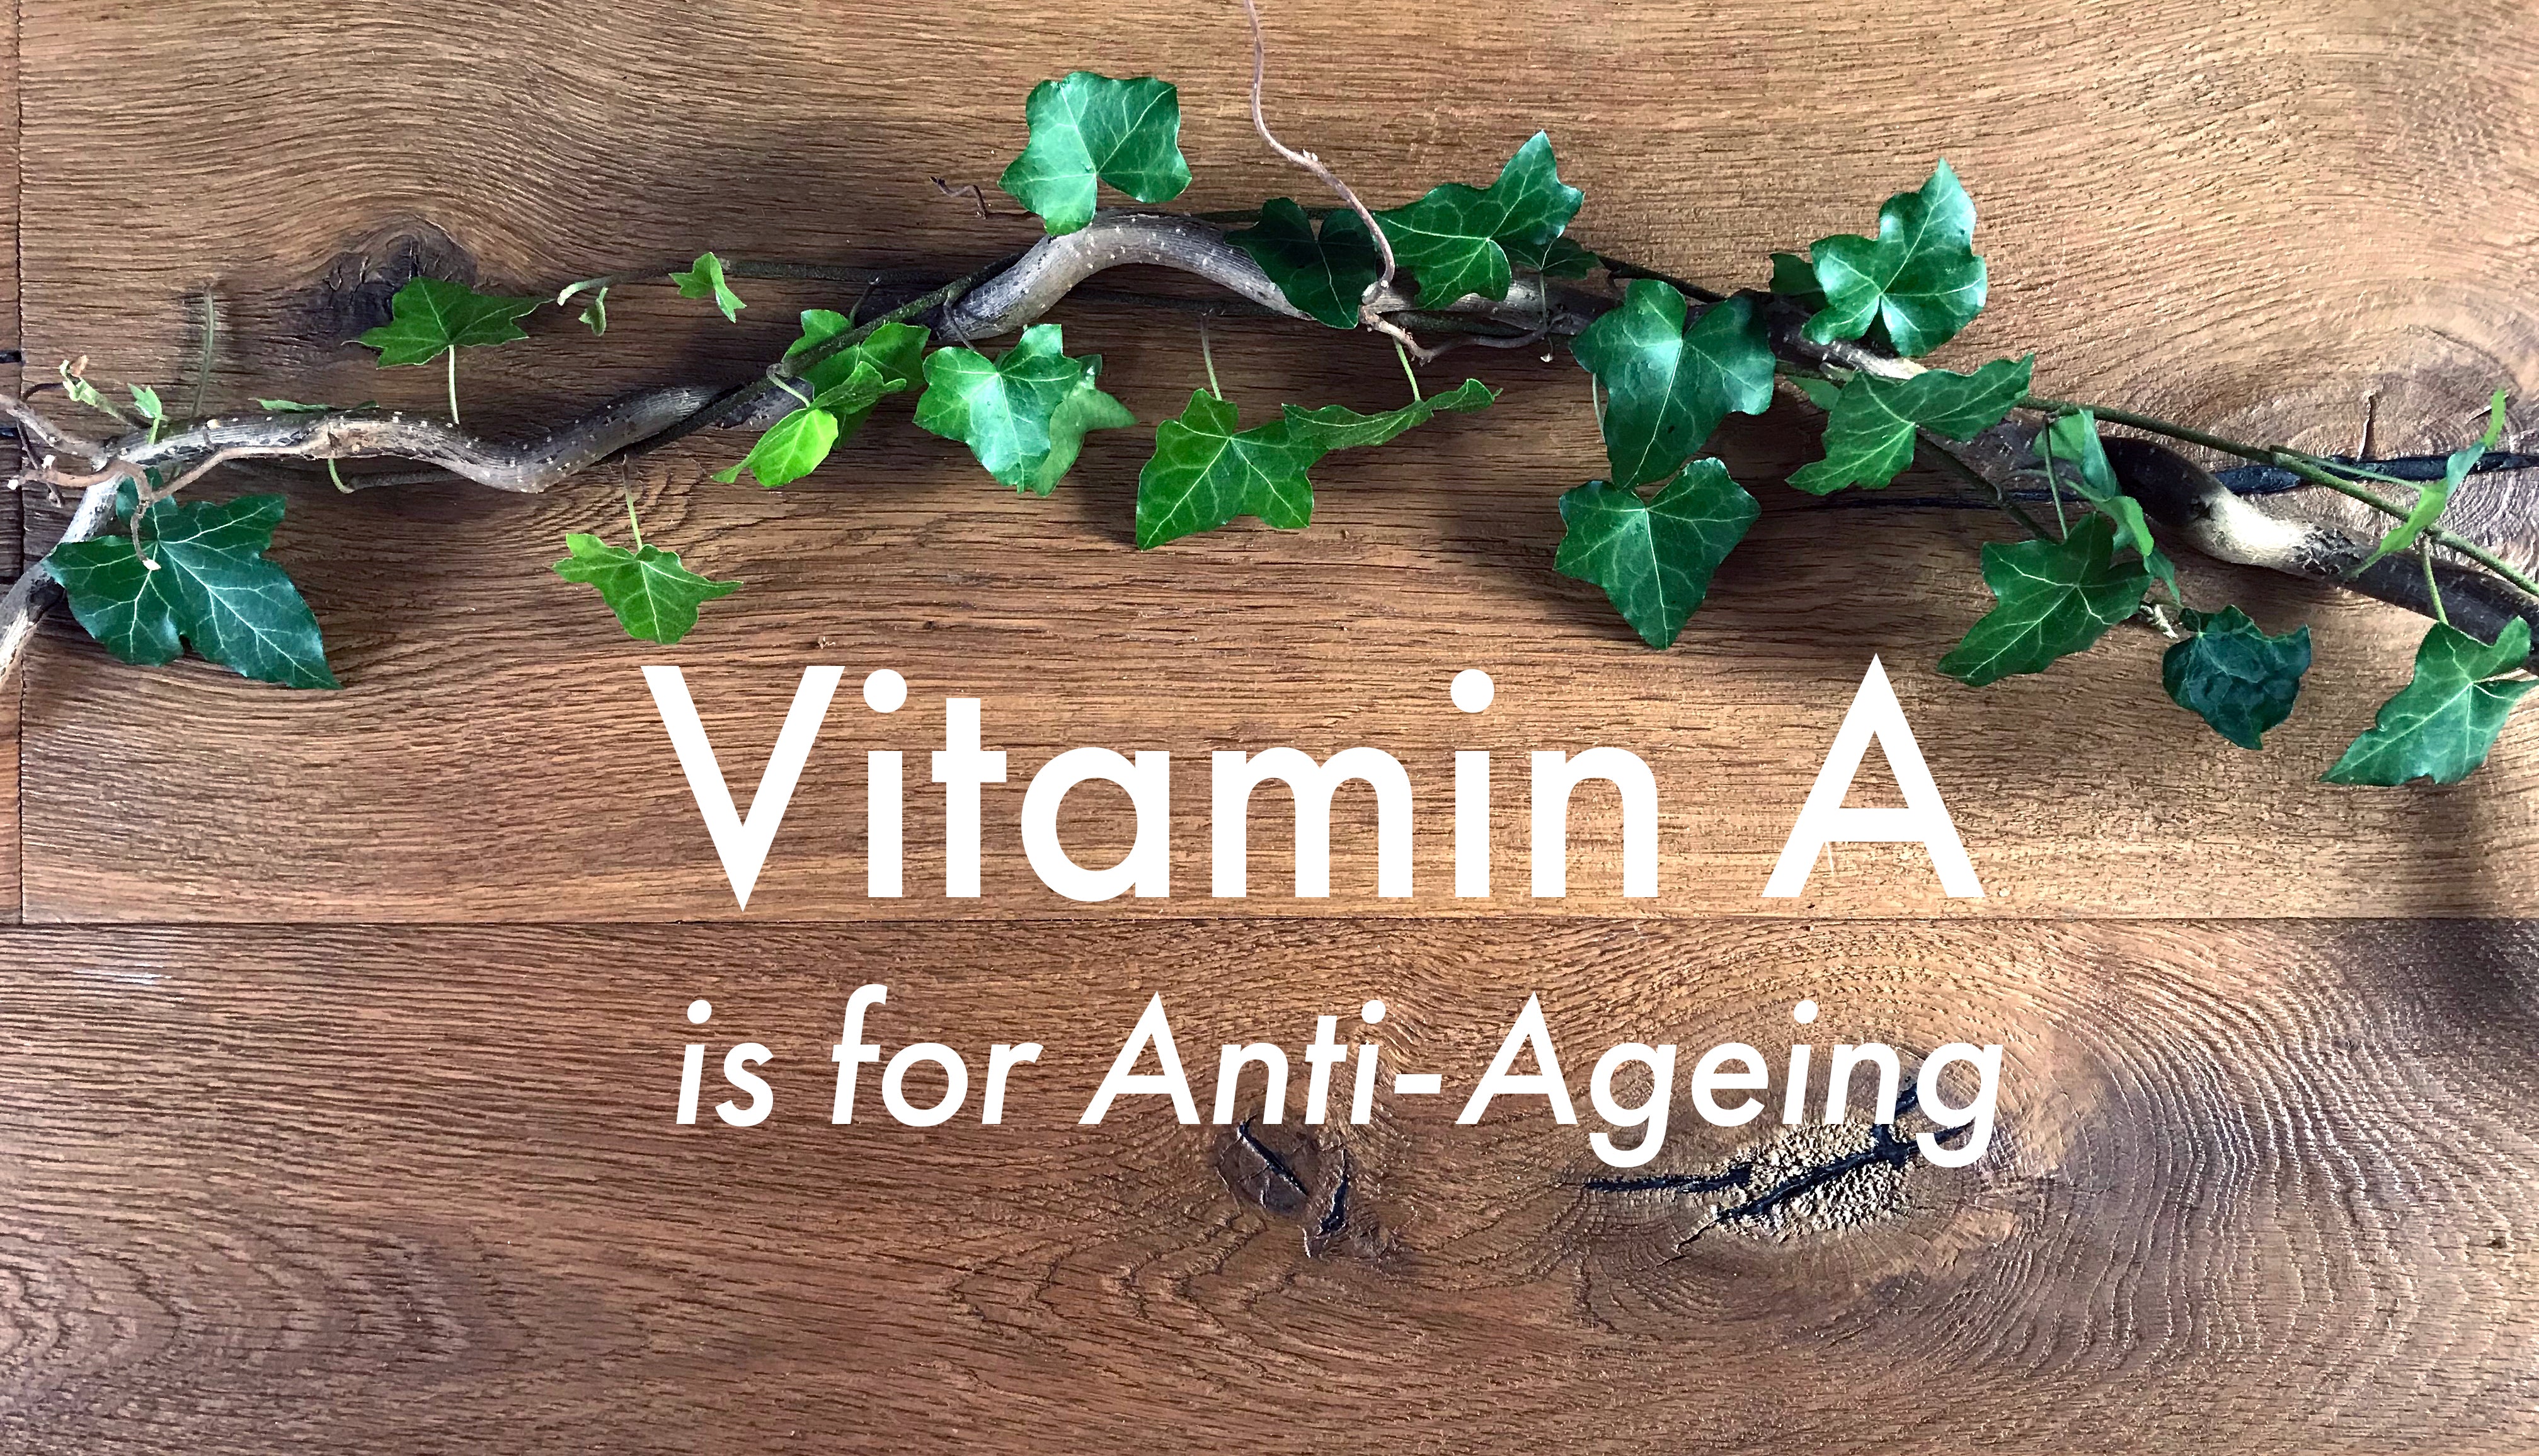 Vitamin A is for Anti-Ageing